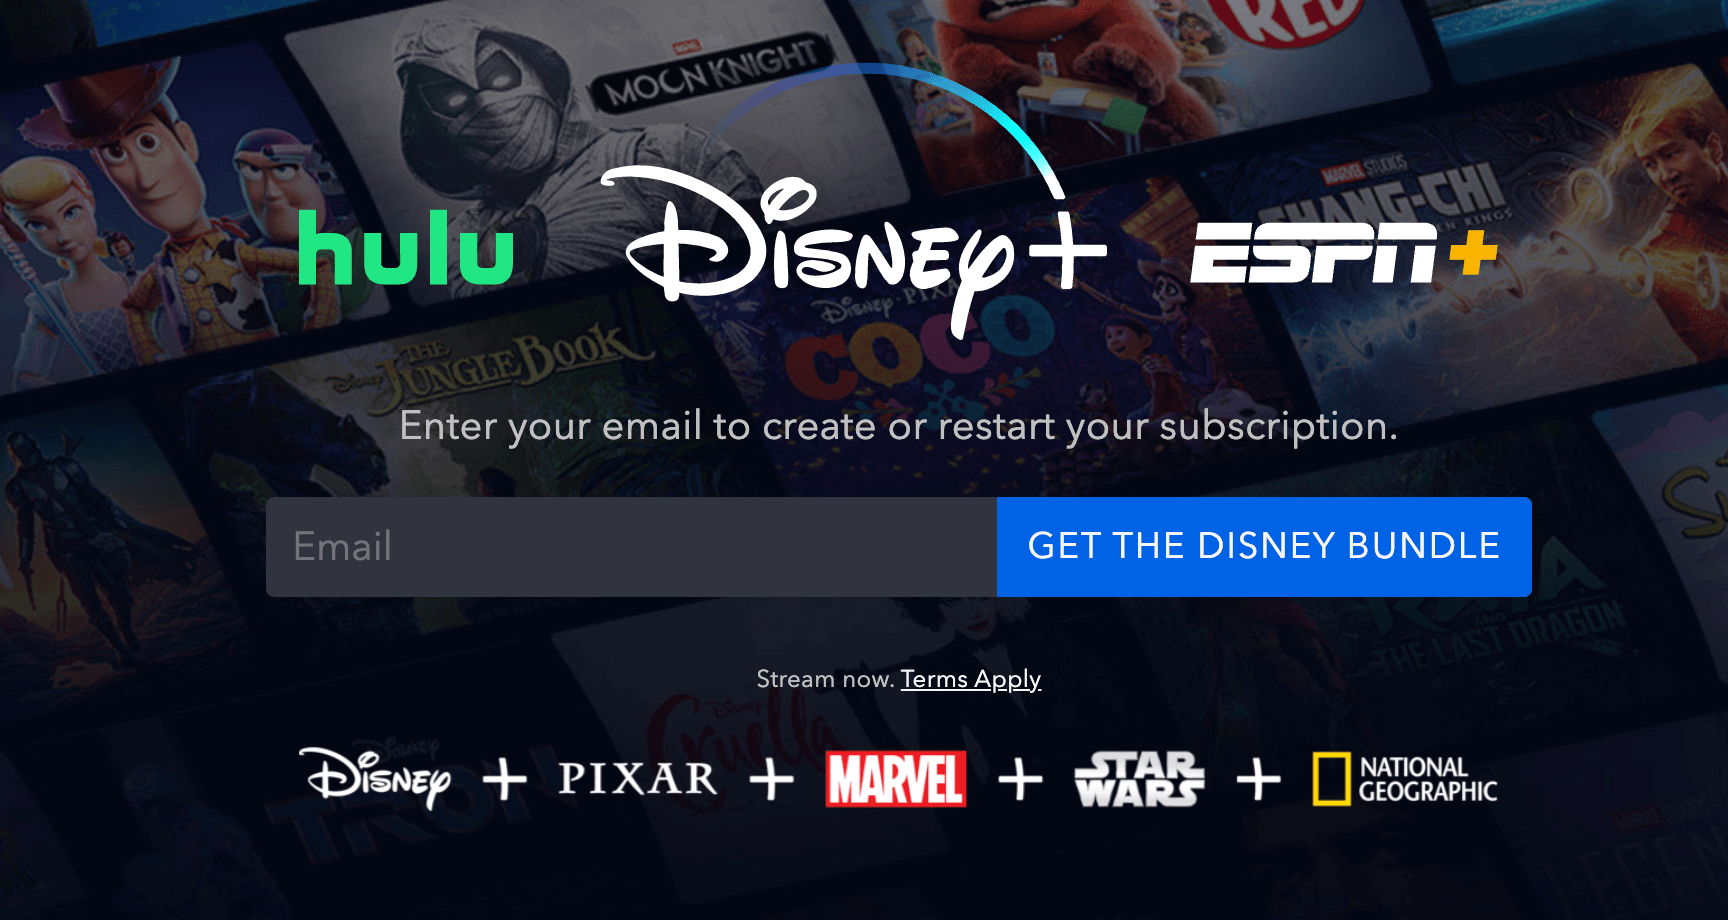 Disney+'s home page